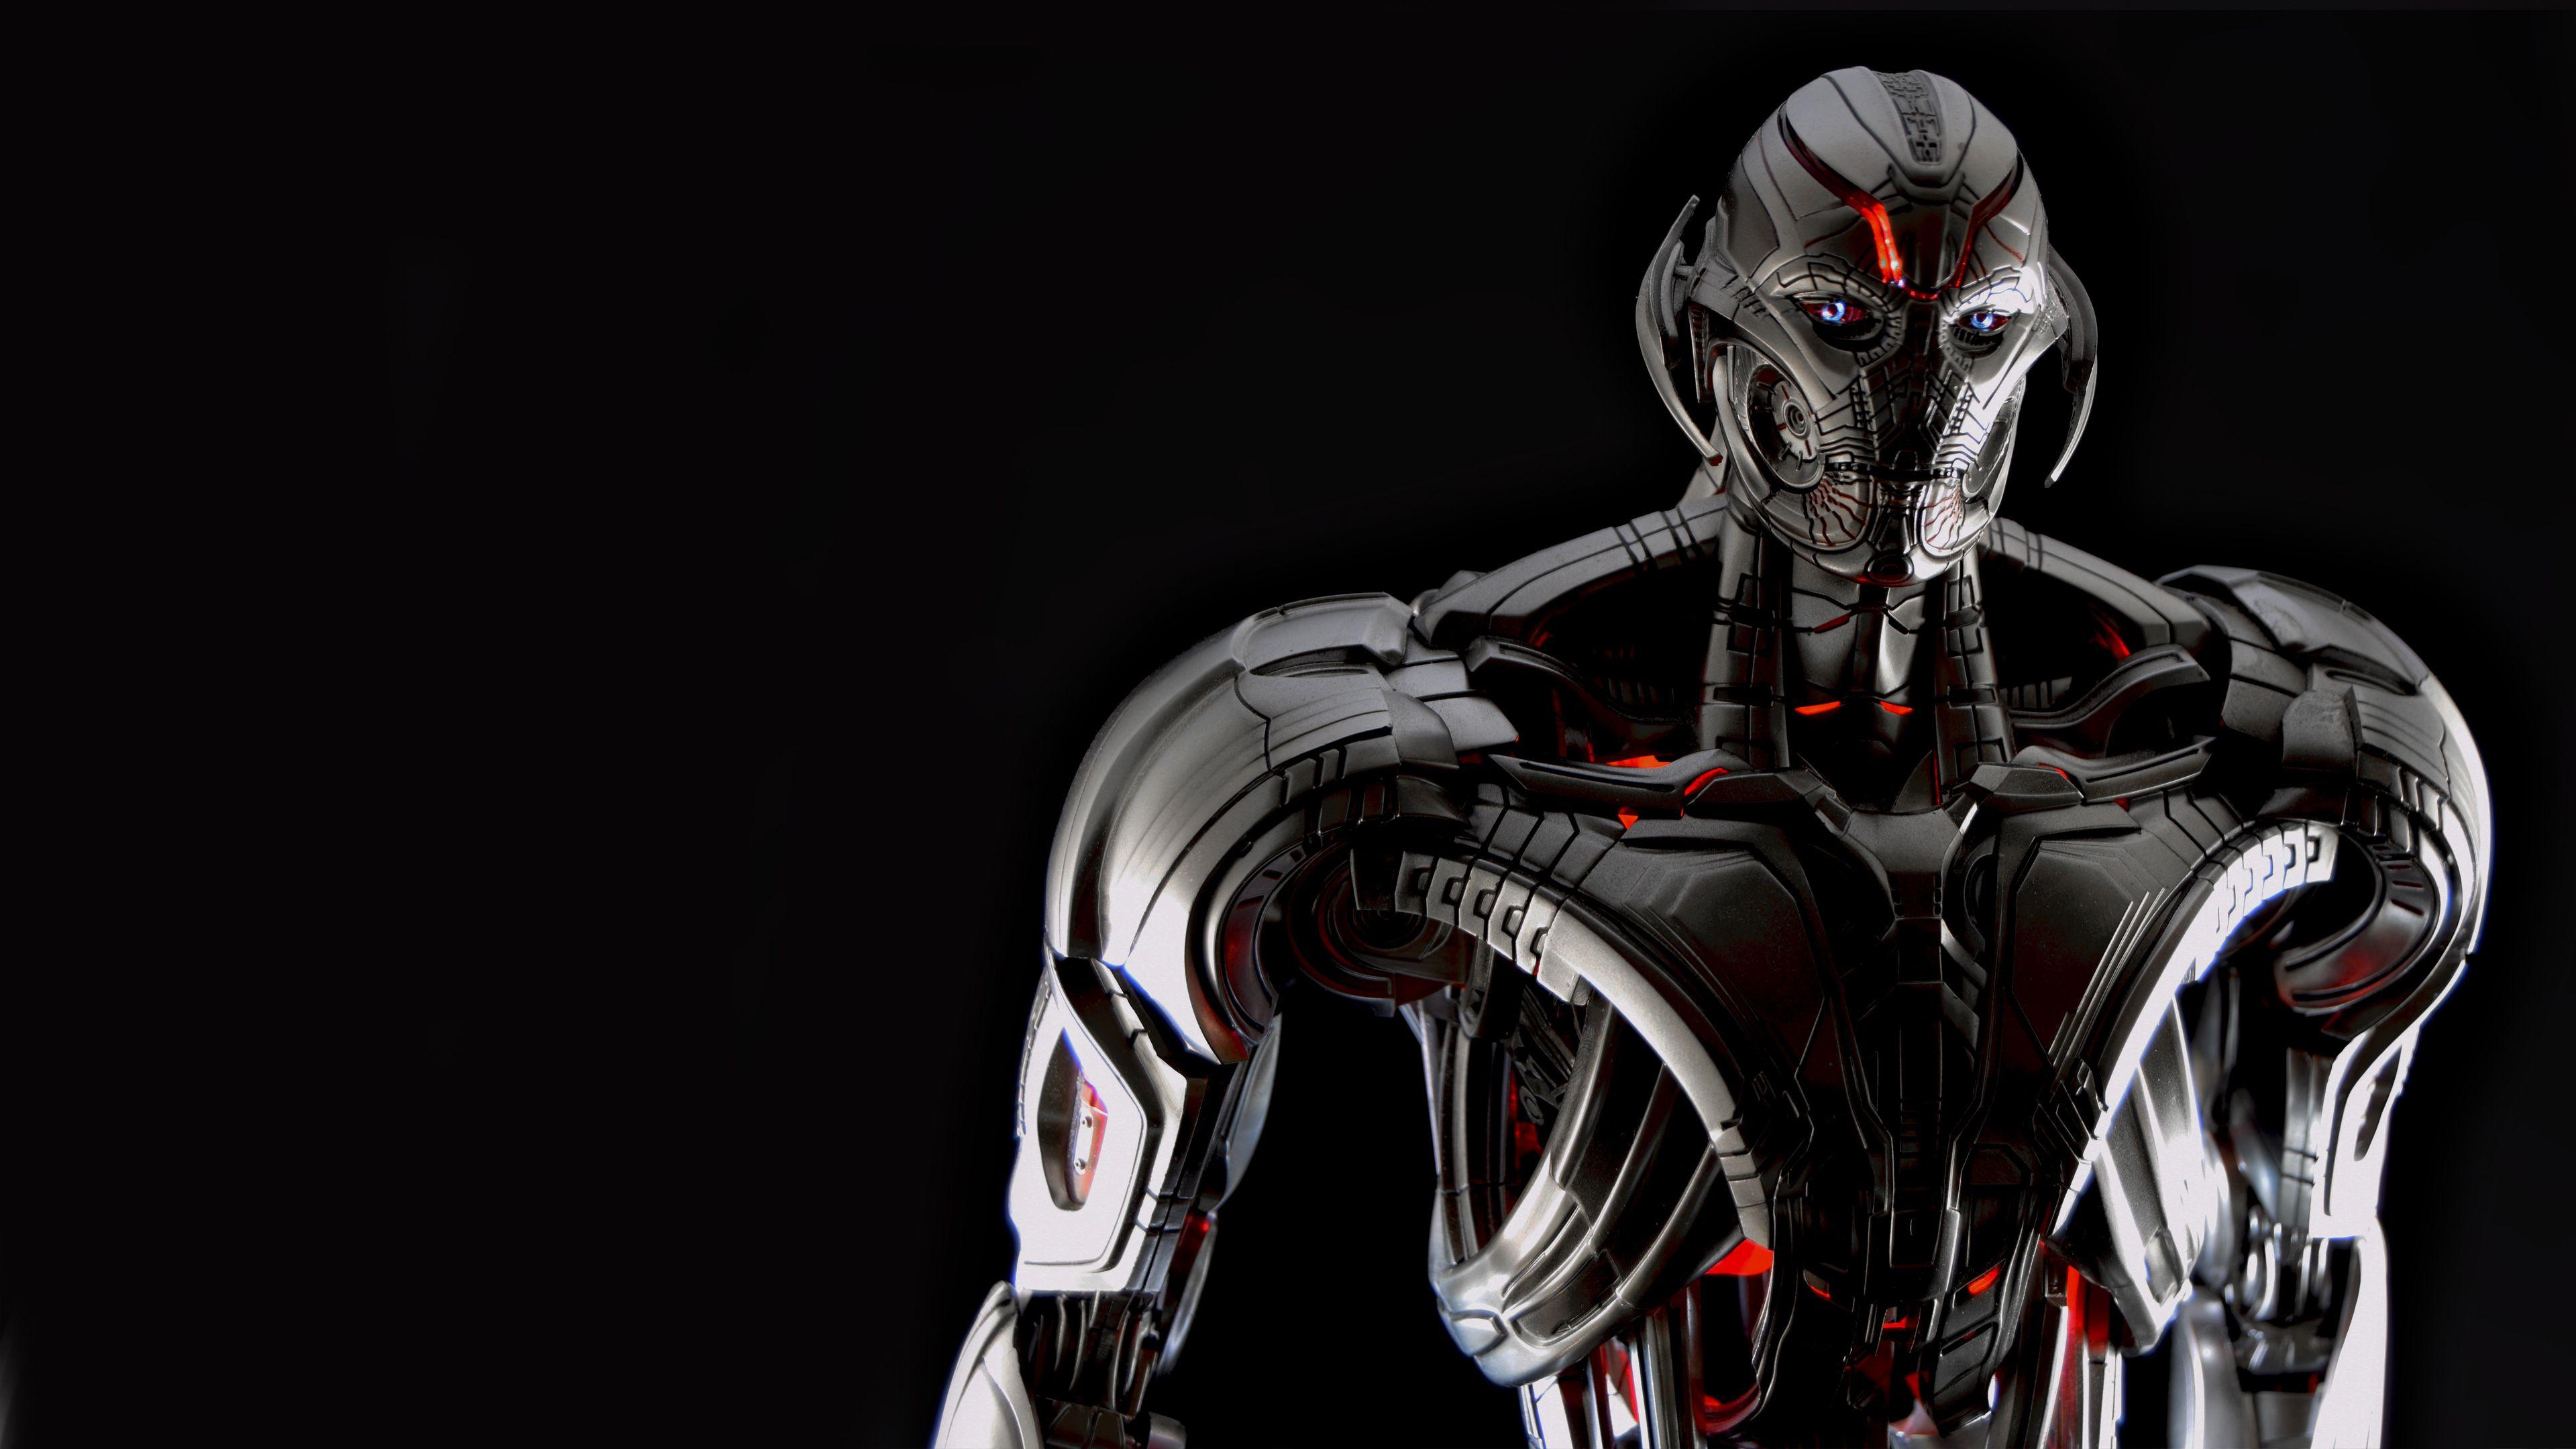 Ultron Wallpapers Top Free Ultron Backgrounds Wallpaperaccess Ultron hd wallpaper posted in mixed wallpapers category and wallpaper original resolution is 1920x1080 px. ultron wallpapers top free ultron